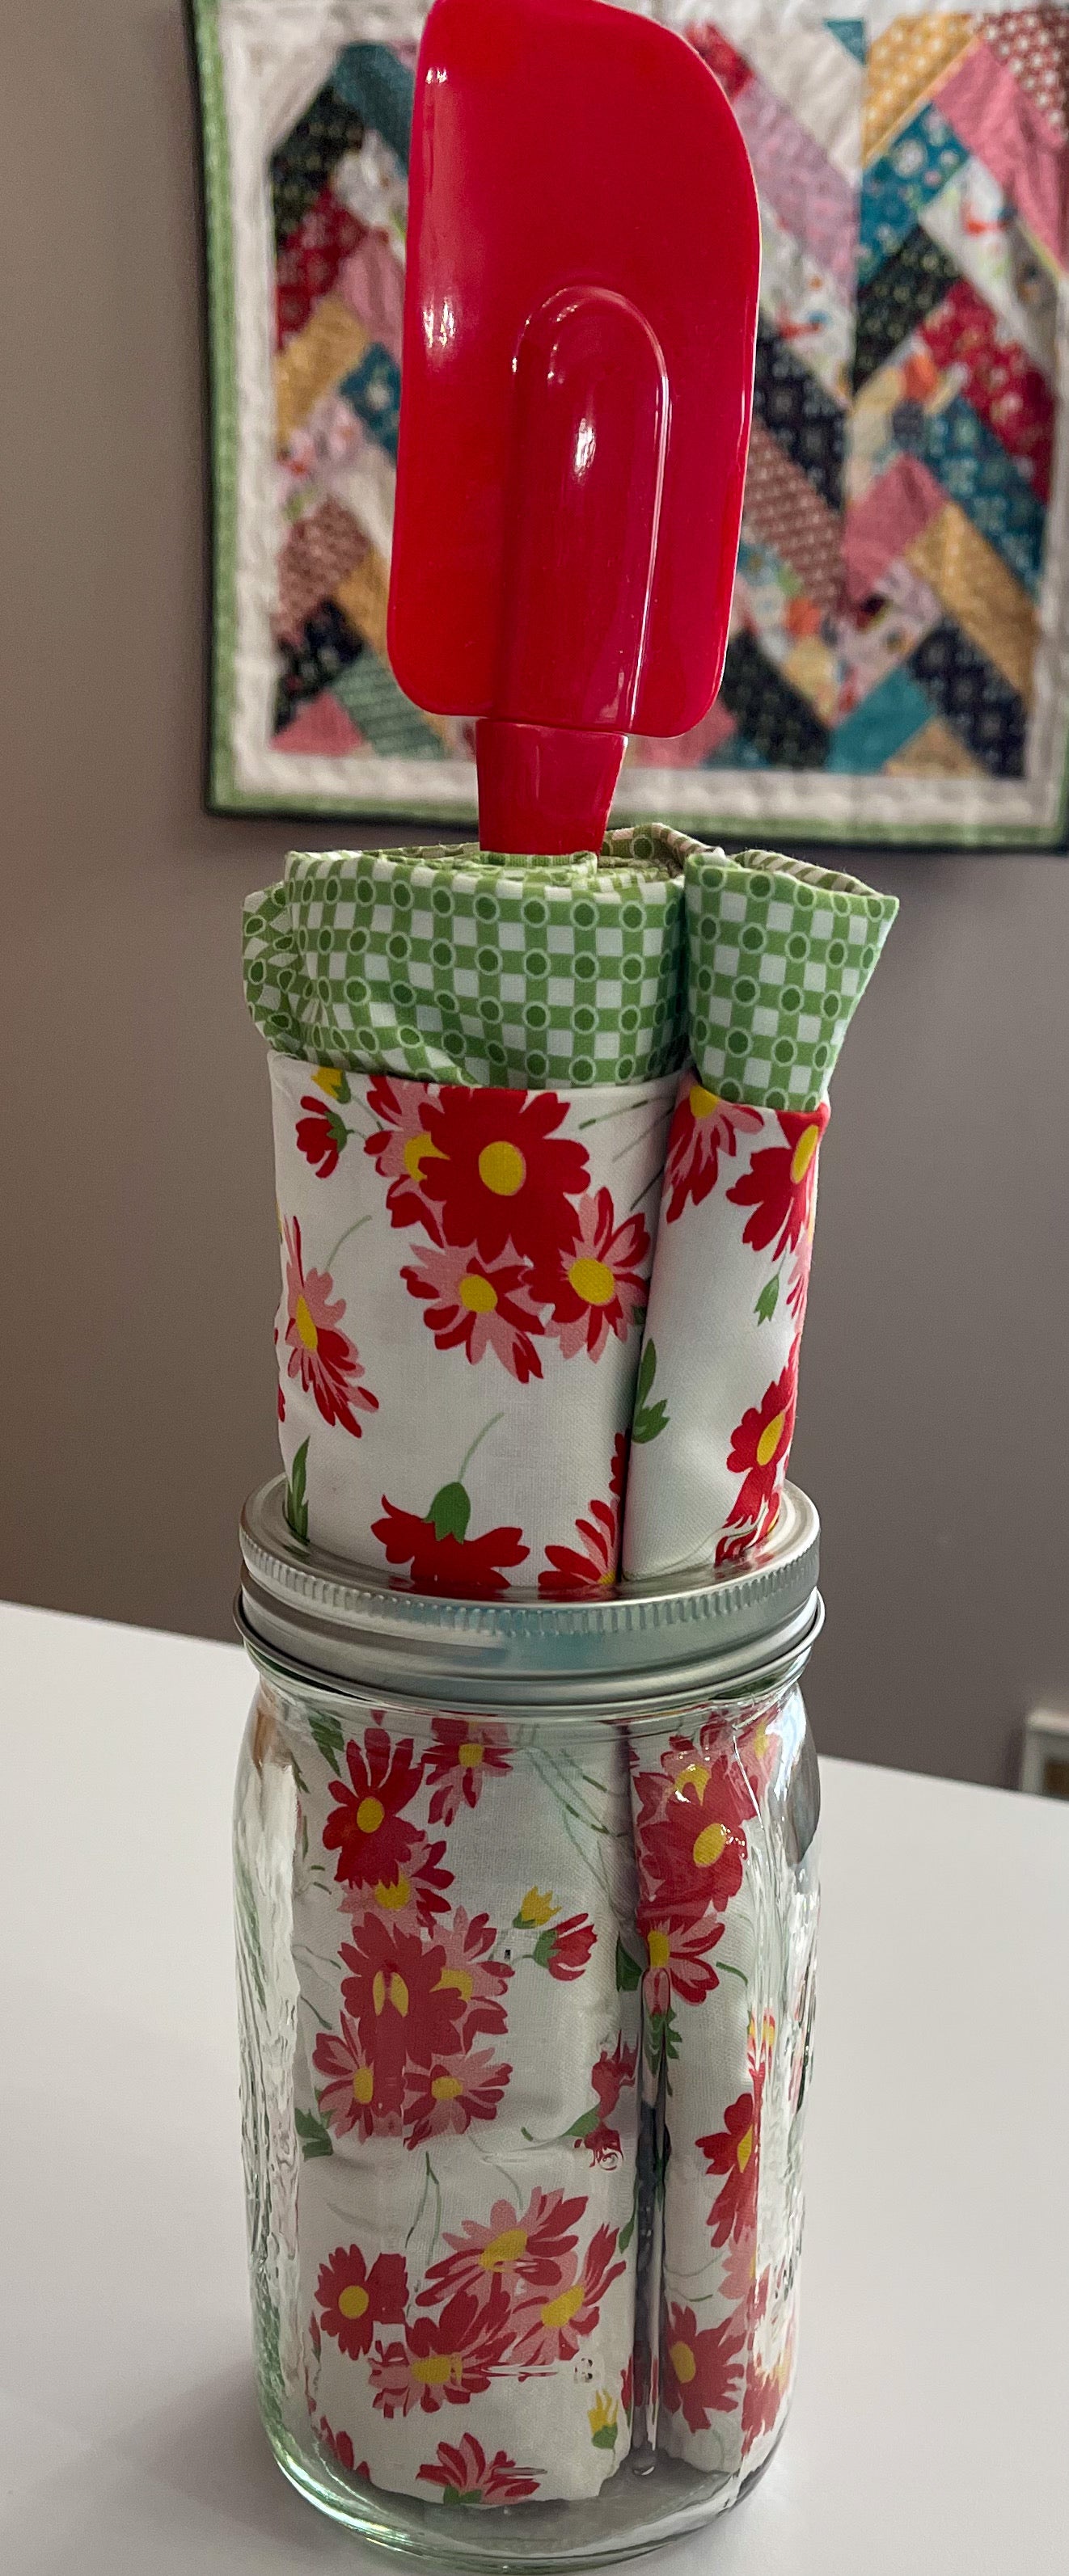 Busy Bea Bundle: Lined Apron in a Jar Red Daisy